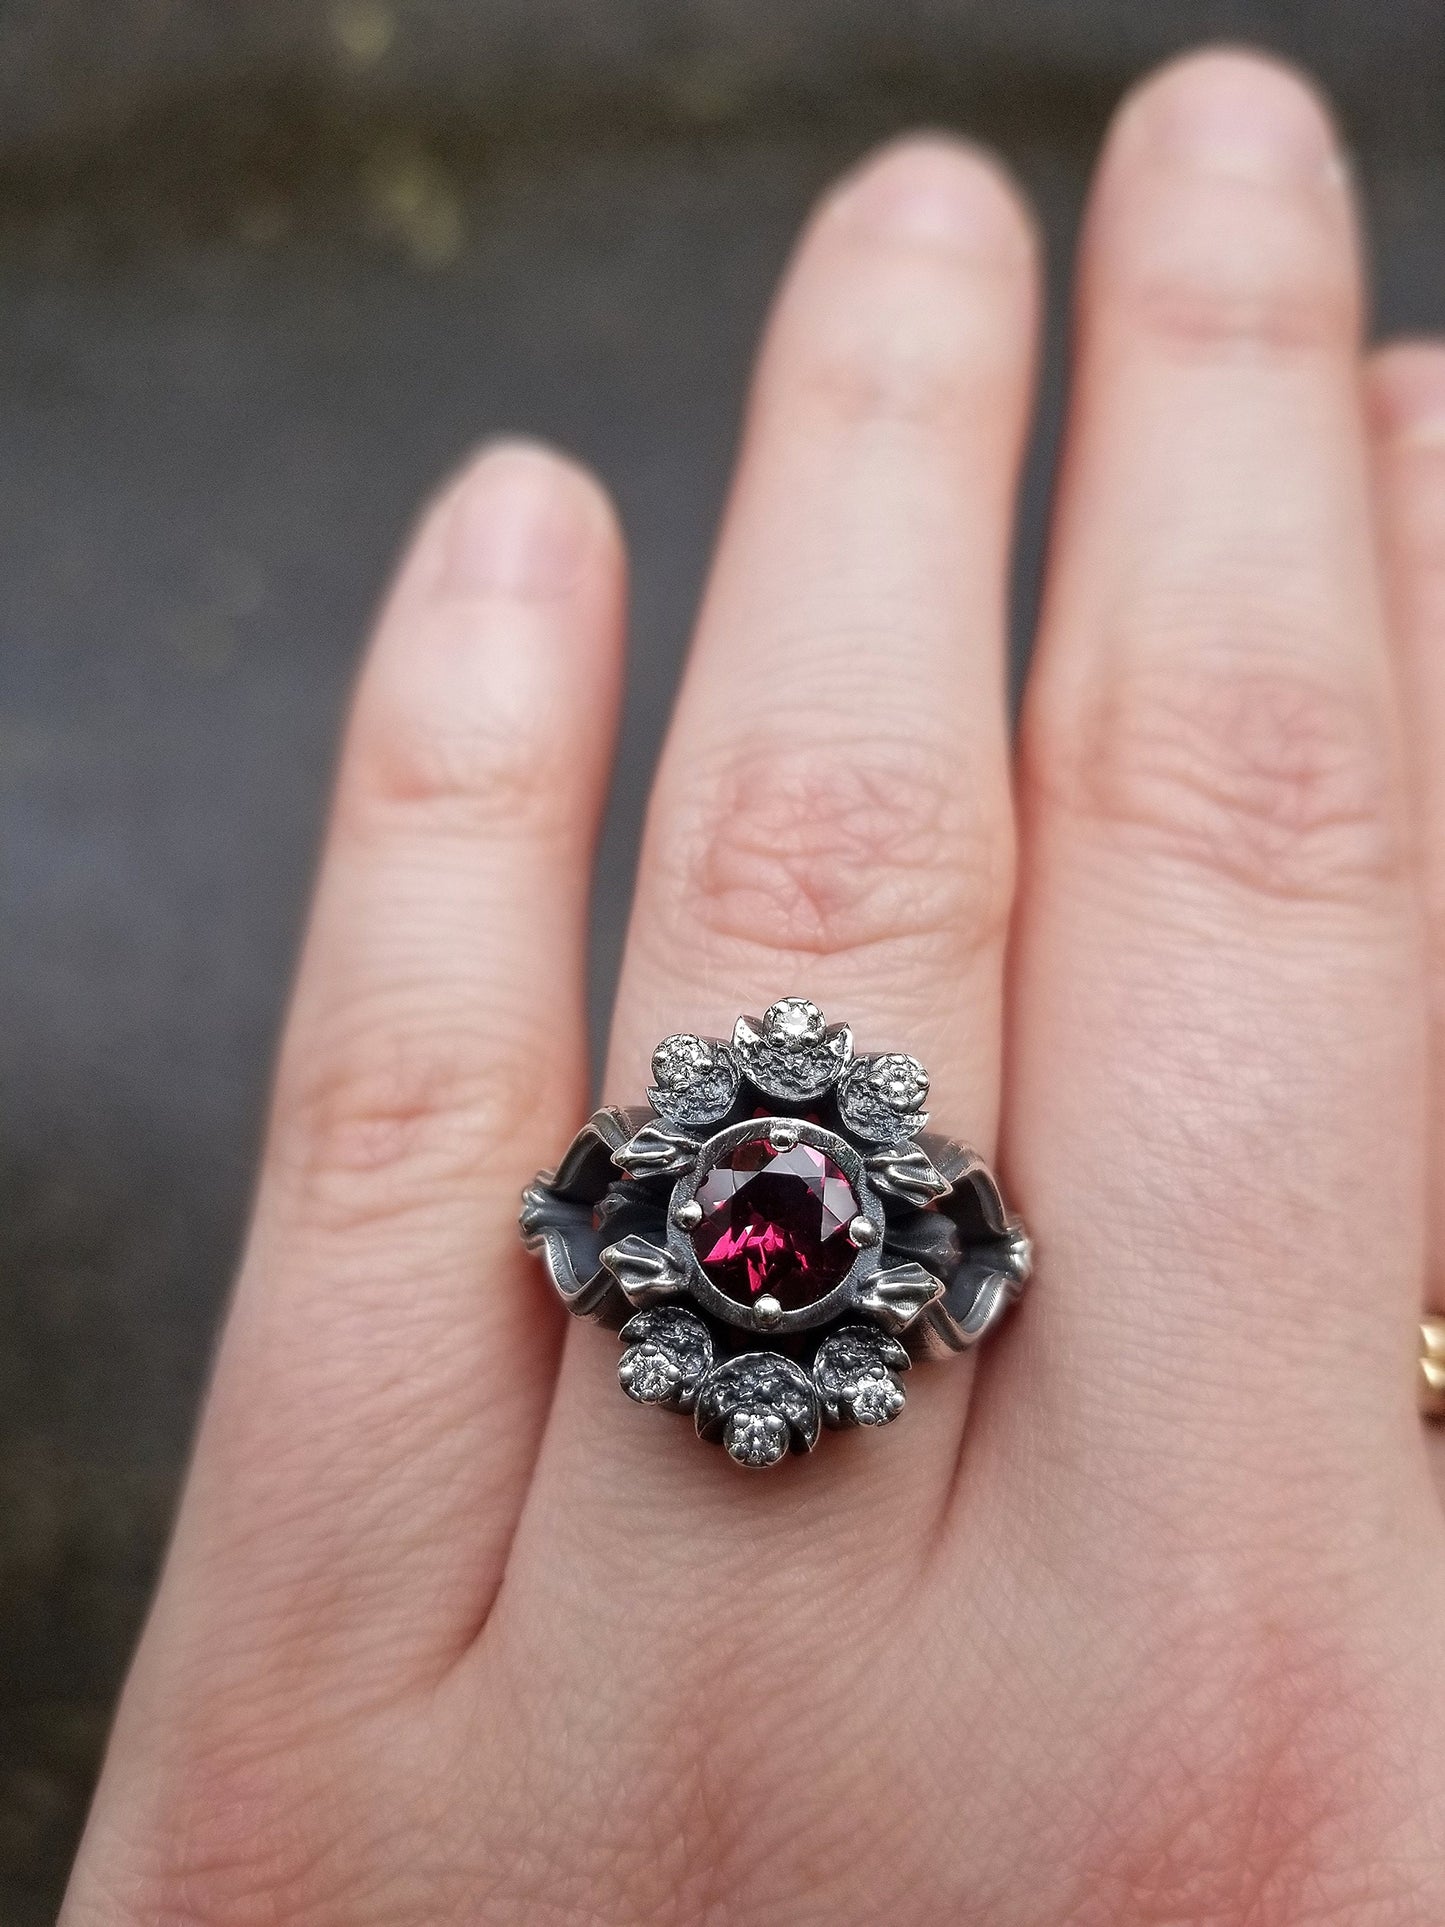 Ready to Ship Size 7.5 - 9.5 - Gothic Snake and Crescent Moon Engagement Ring - Rhodolite Garnet and Silver Galaxy Diamonds